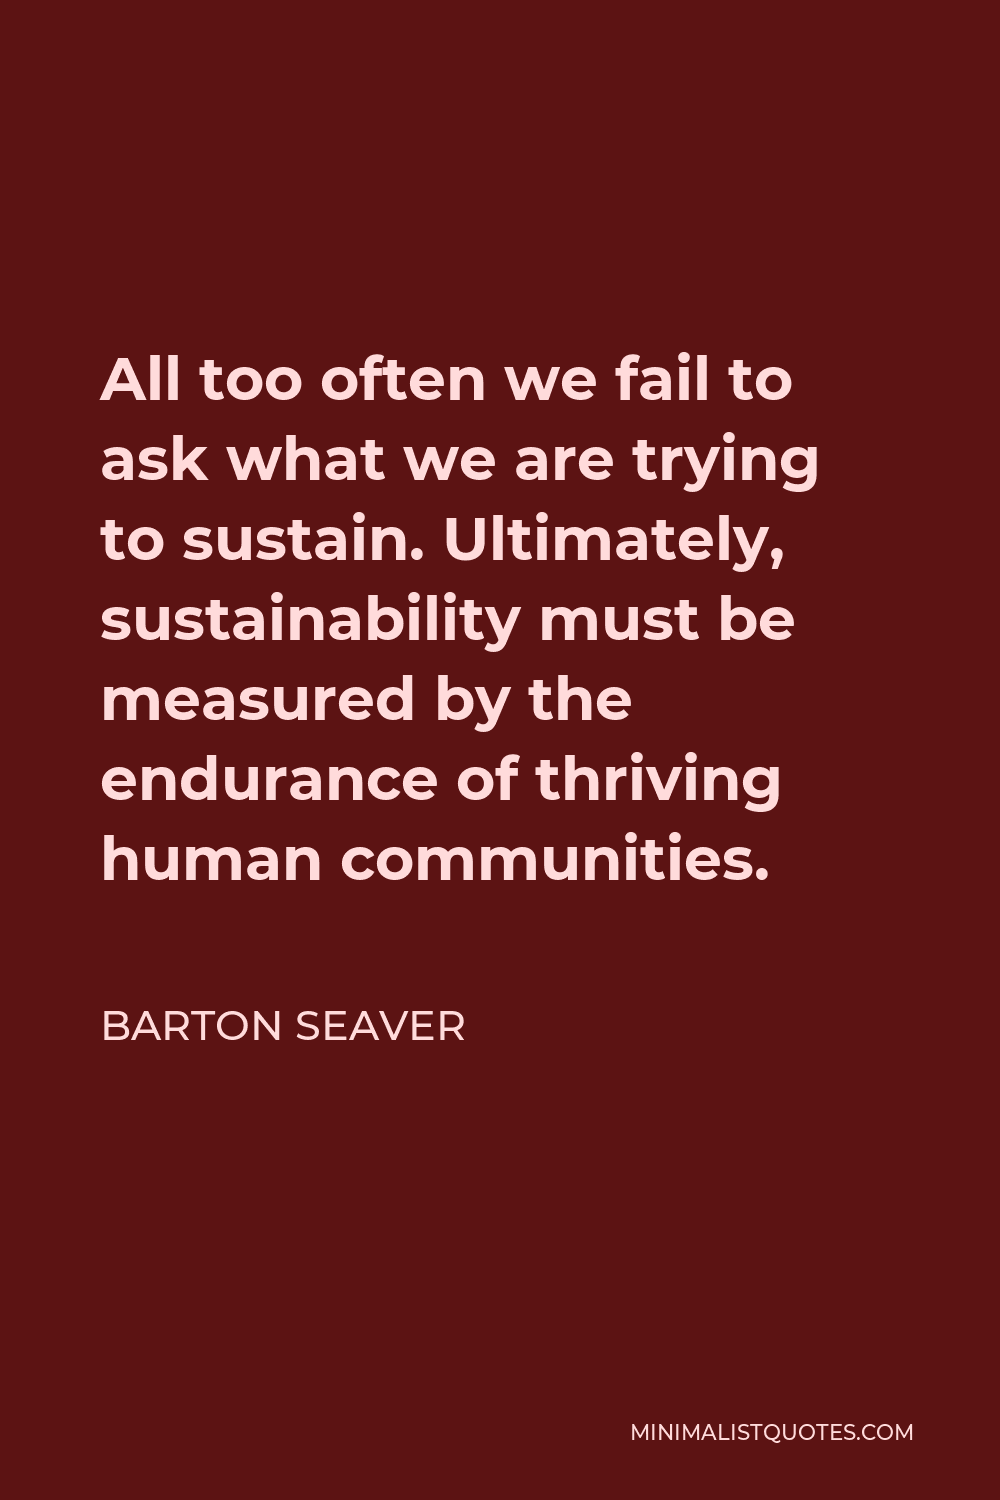 Barton Seaver Quote - All too often we fail to ask what we are trying to sustain. Ultimately, sustainability must be measured by the endurance of thriving human communities.